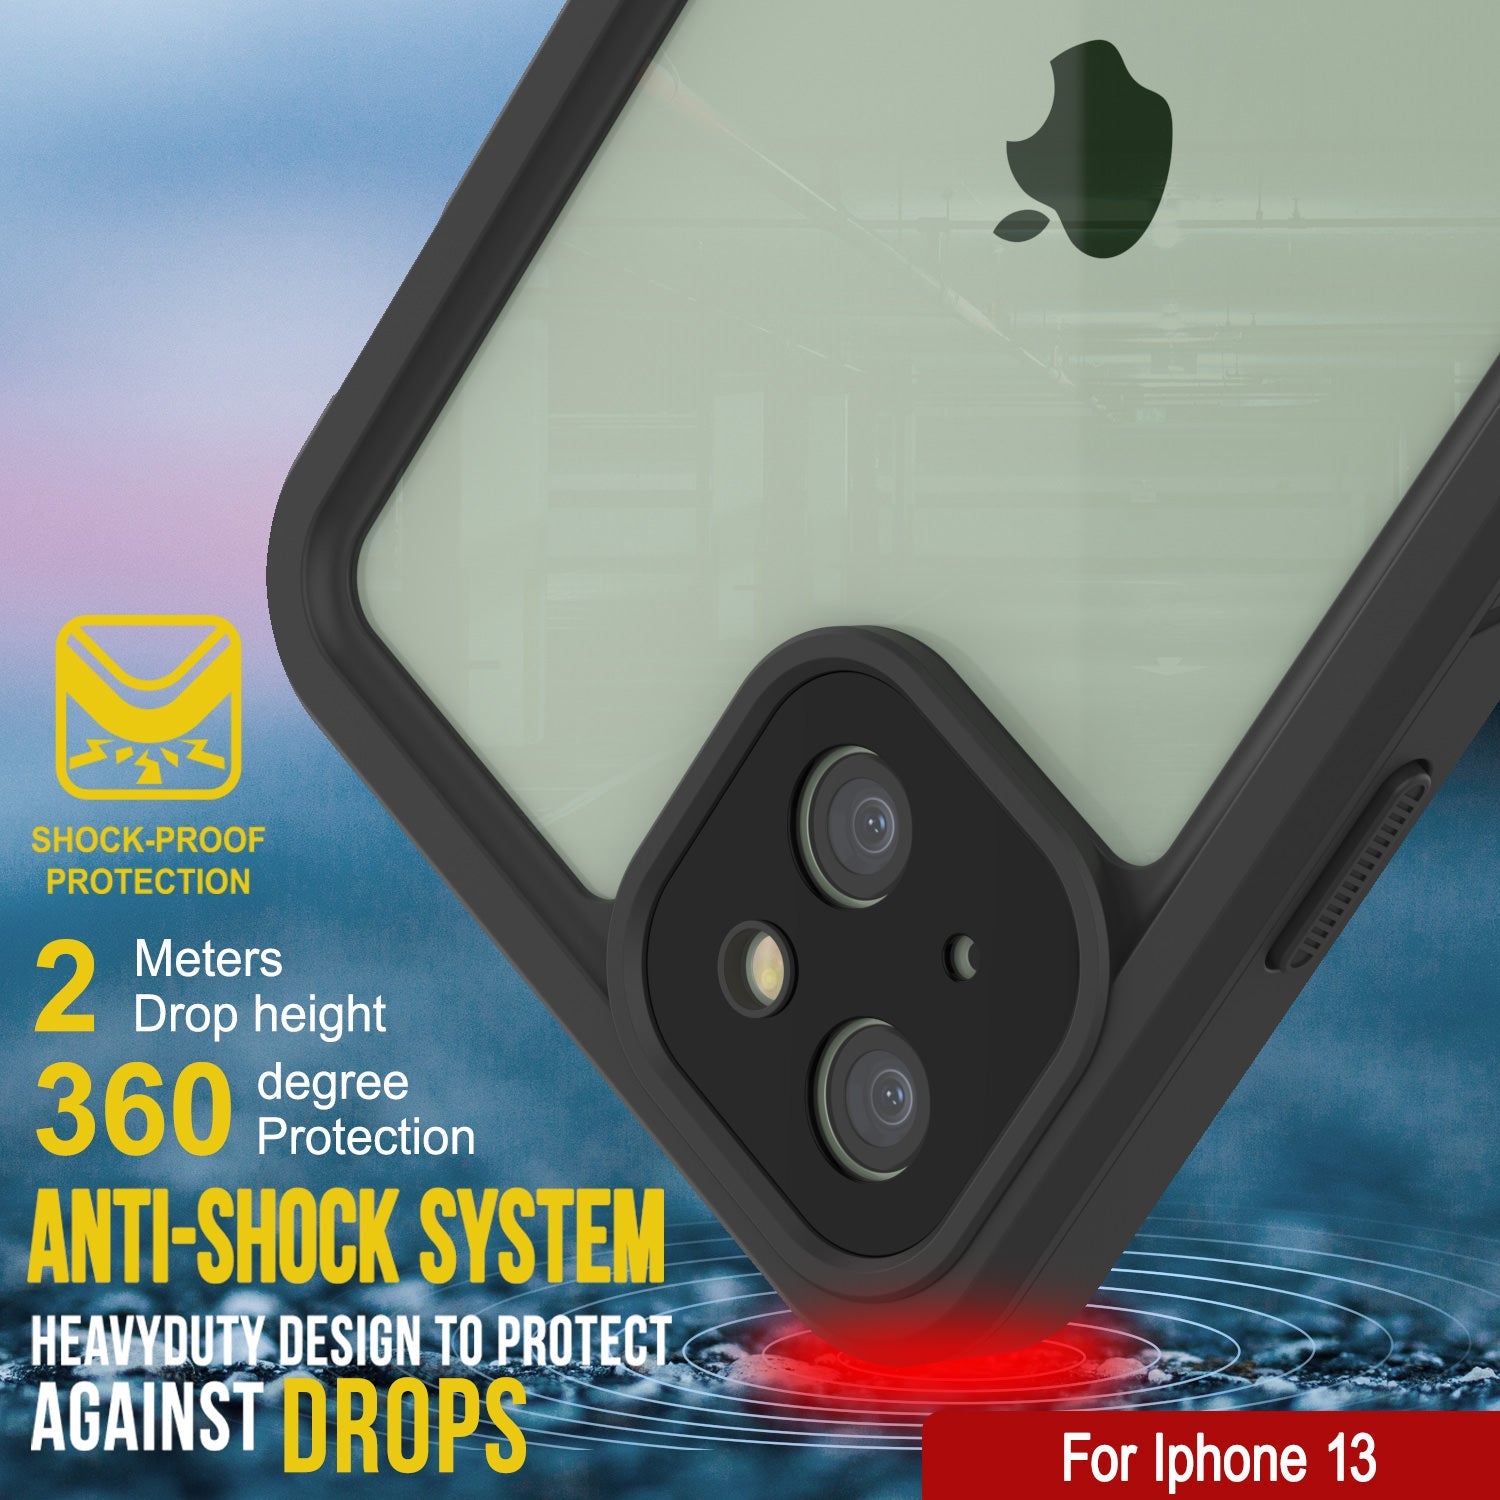 iPhone 13  Waterproof Case, Punkcase [Extreme Series] Armor Cover W/ Built In Screen Protector [Teal]